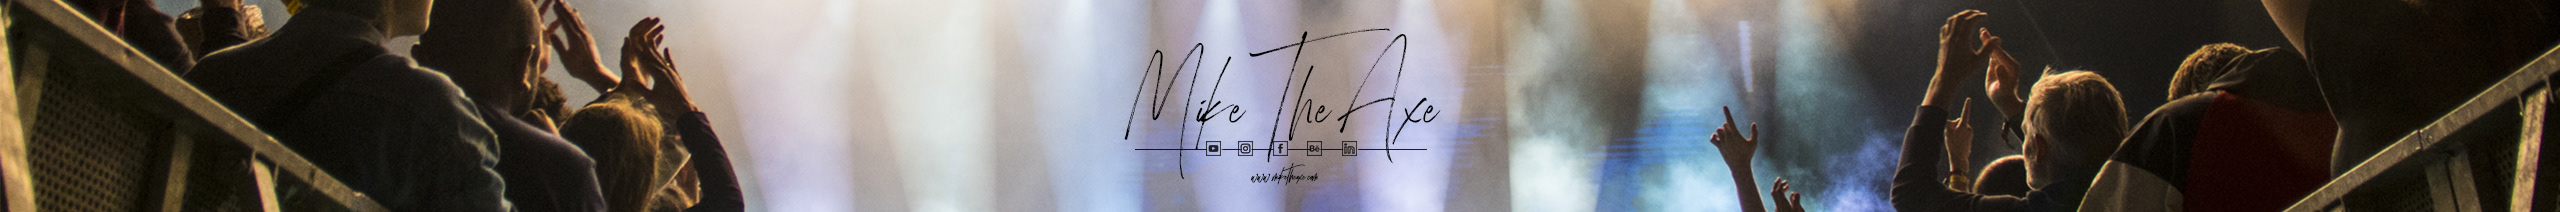 Mike The Axe's profile banner